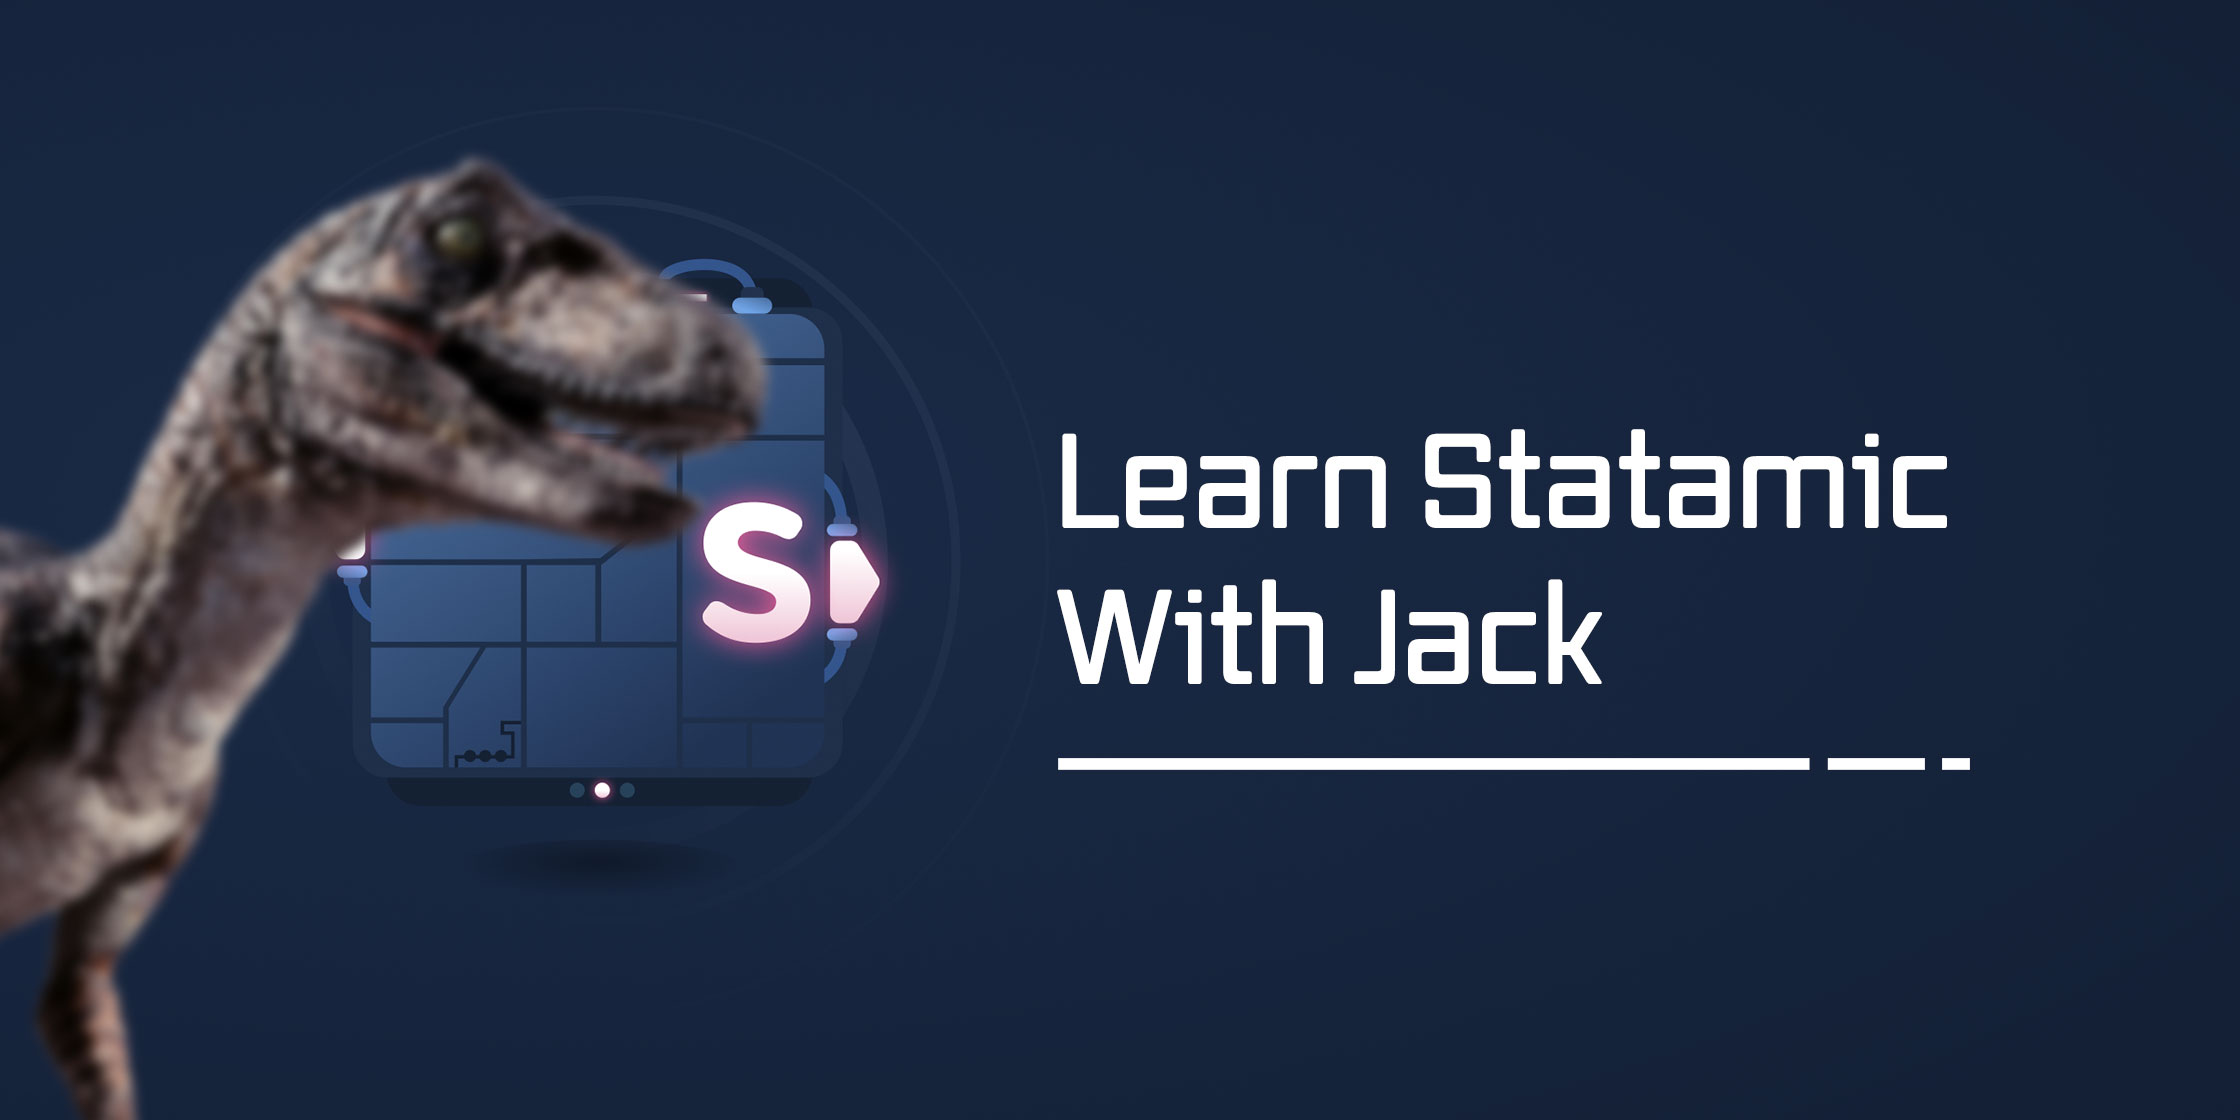 Today Laracasts launched its latest Creator Series on Statamic, created by Jack McDade!